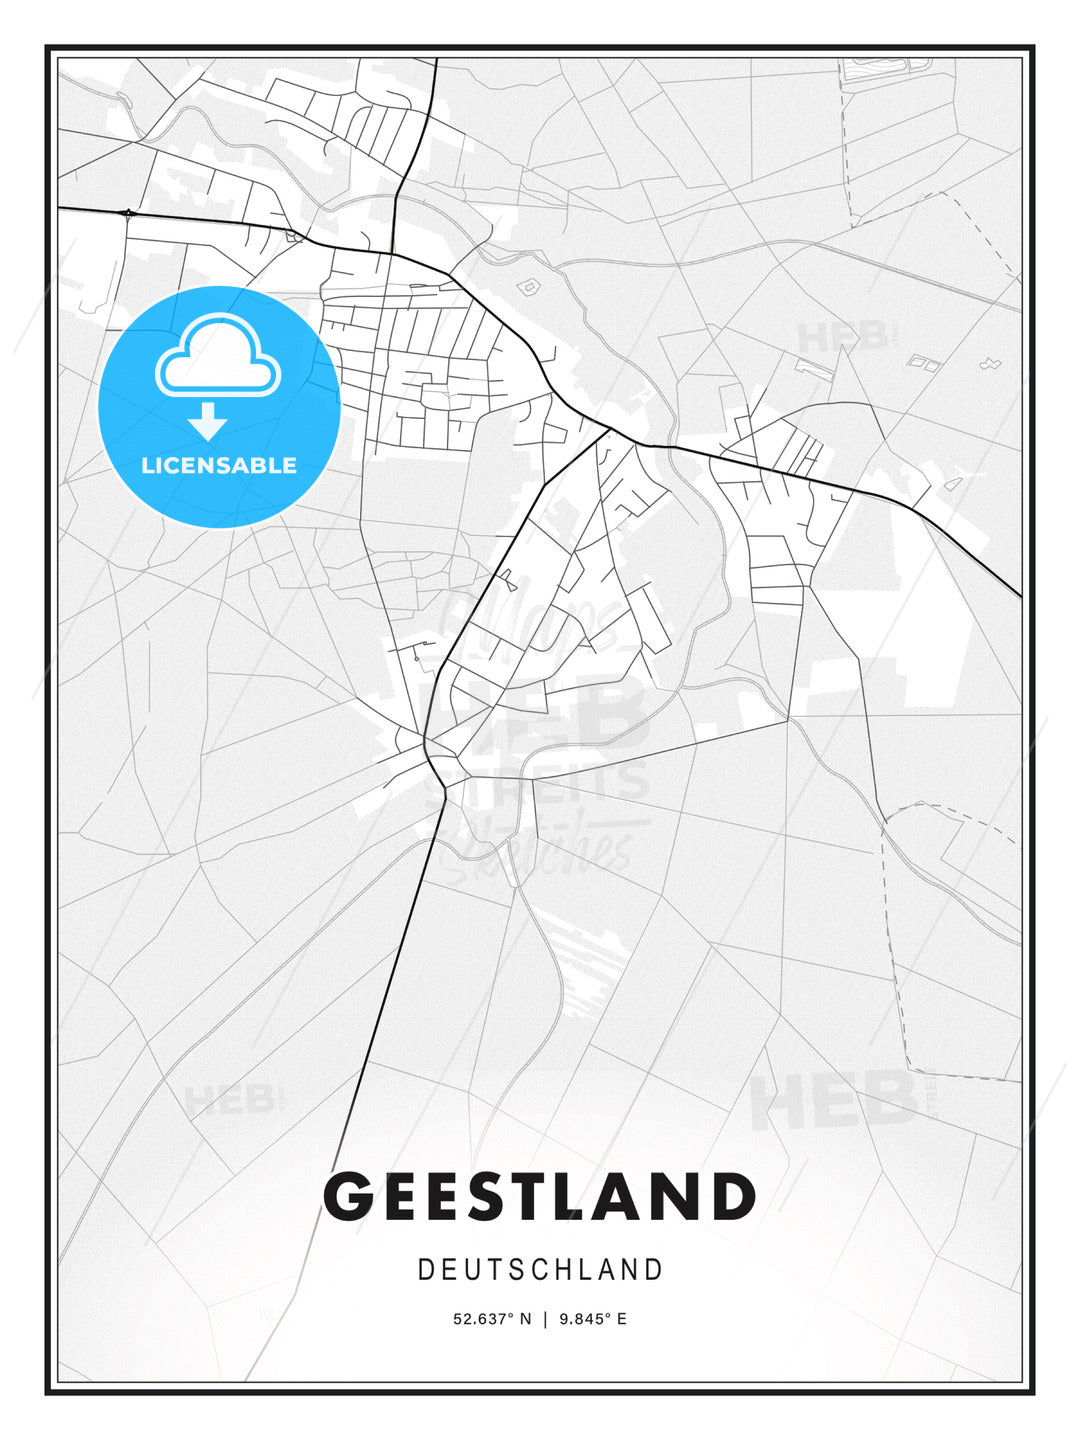 Geestland, Germany, Modern Print Template in Various Formats - HEBSTREITS Sketches